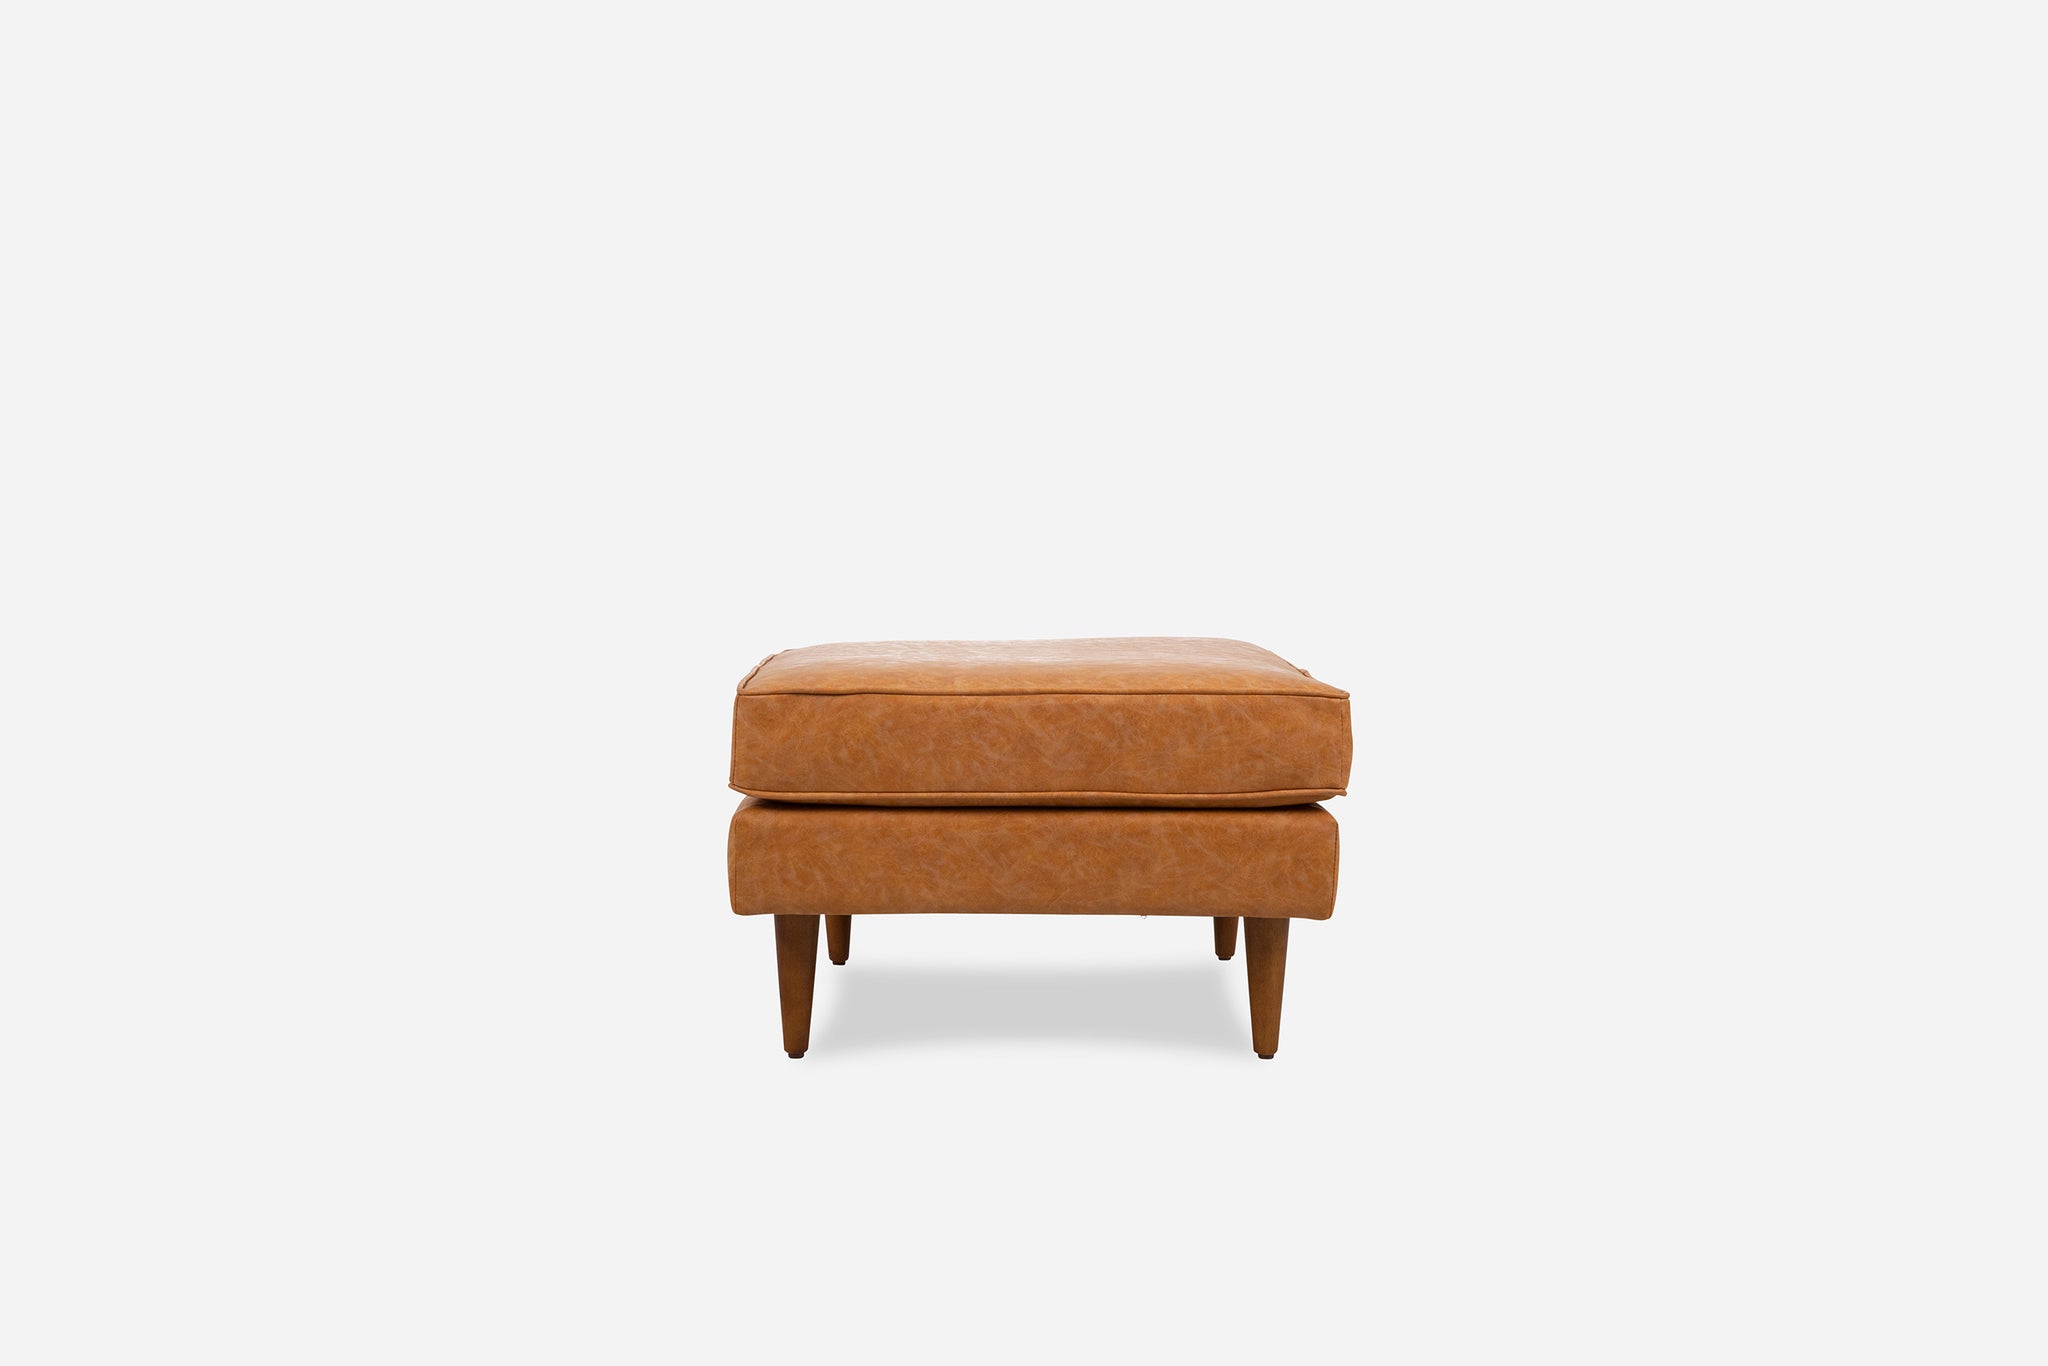 albany ottoman shown in distressed vegan leather with walnut legs